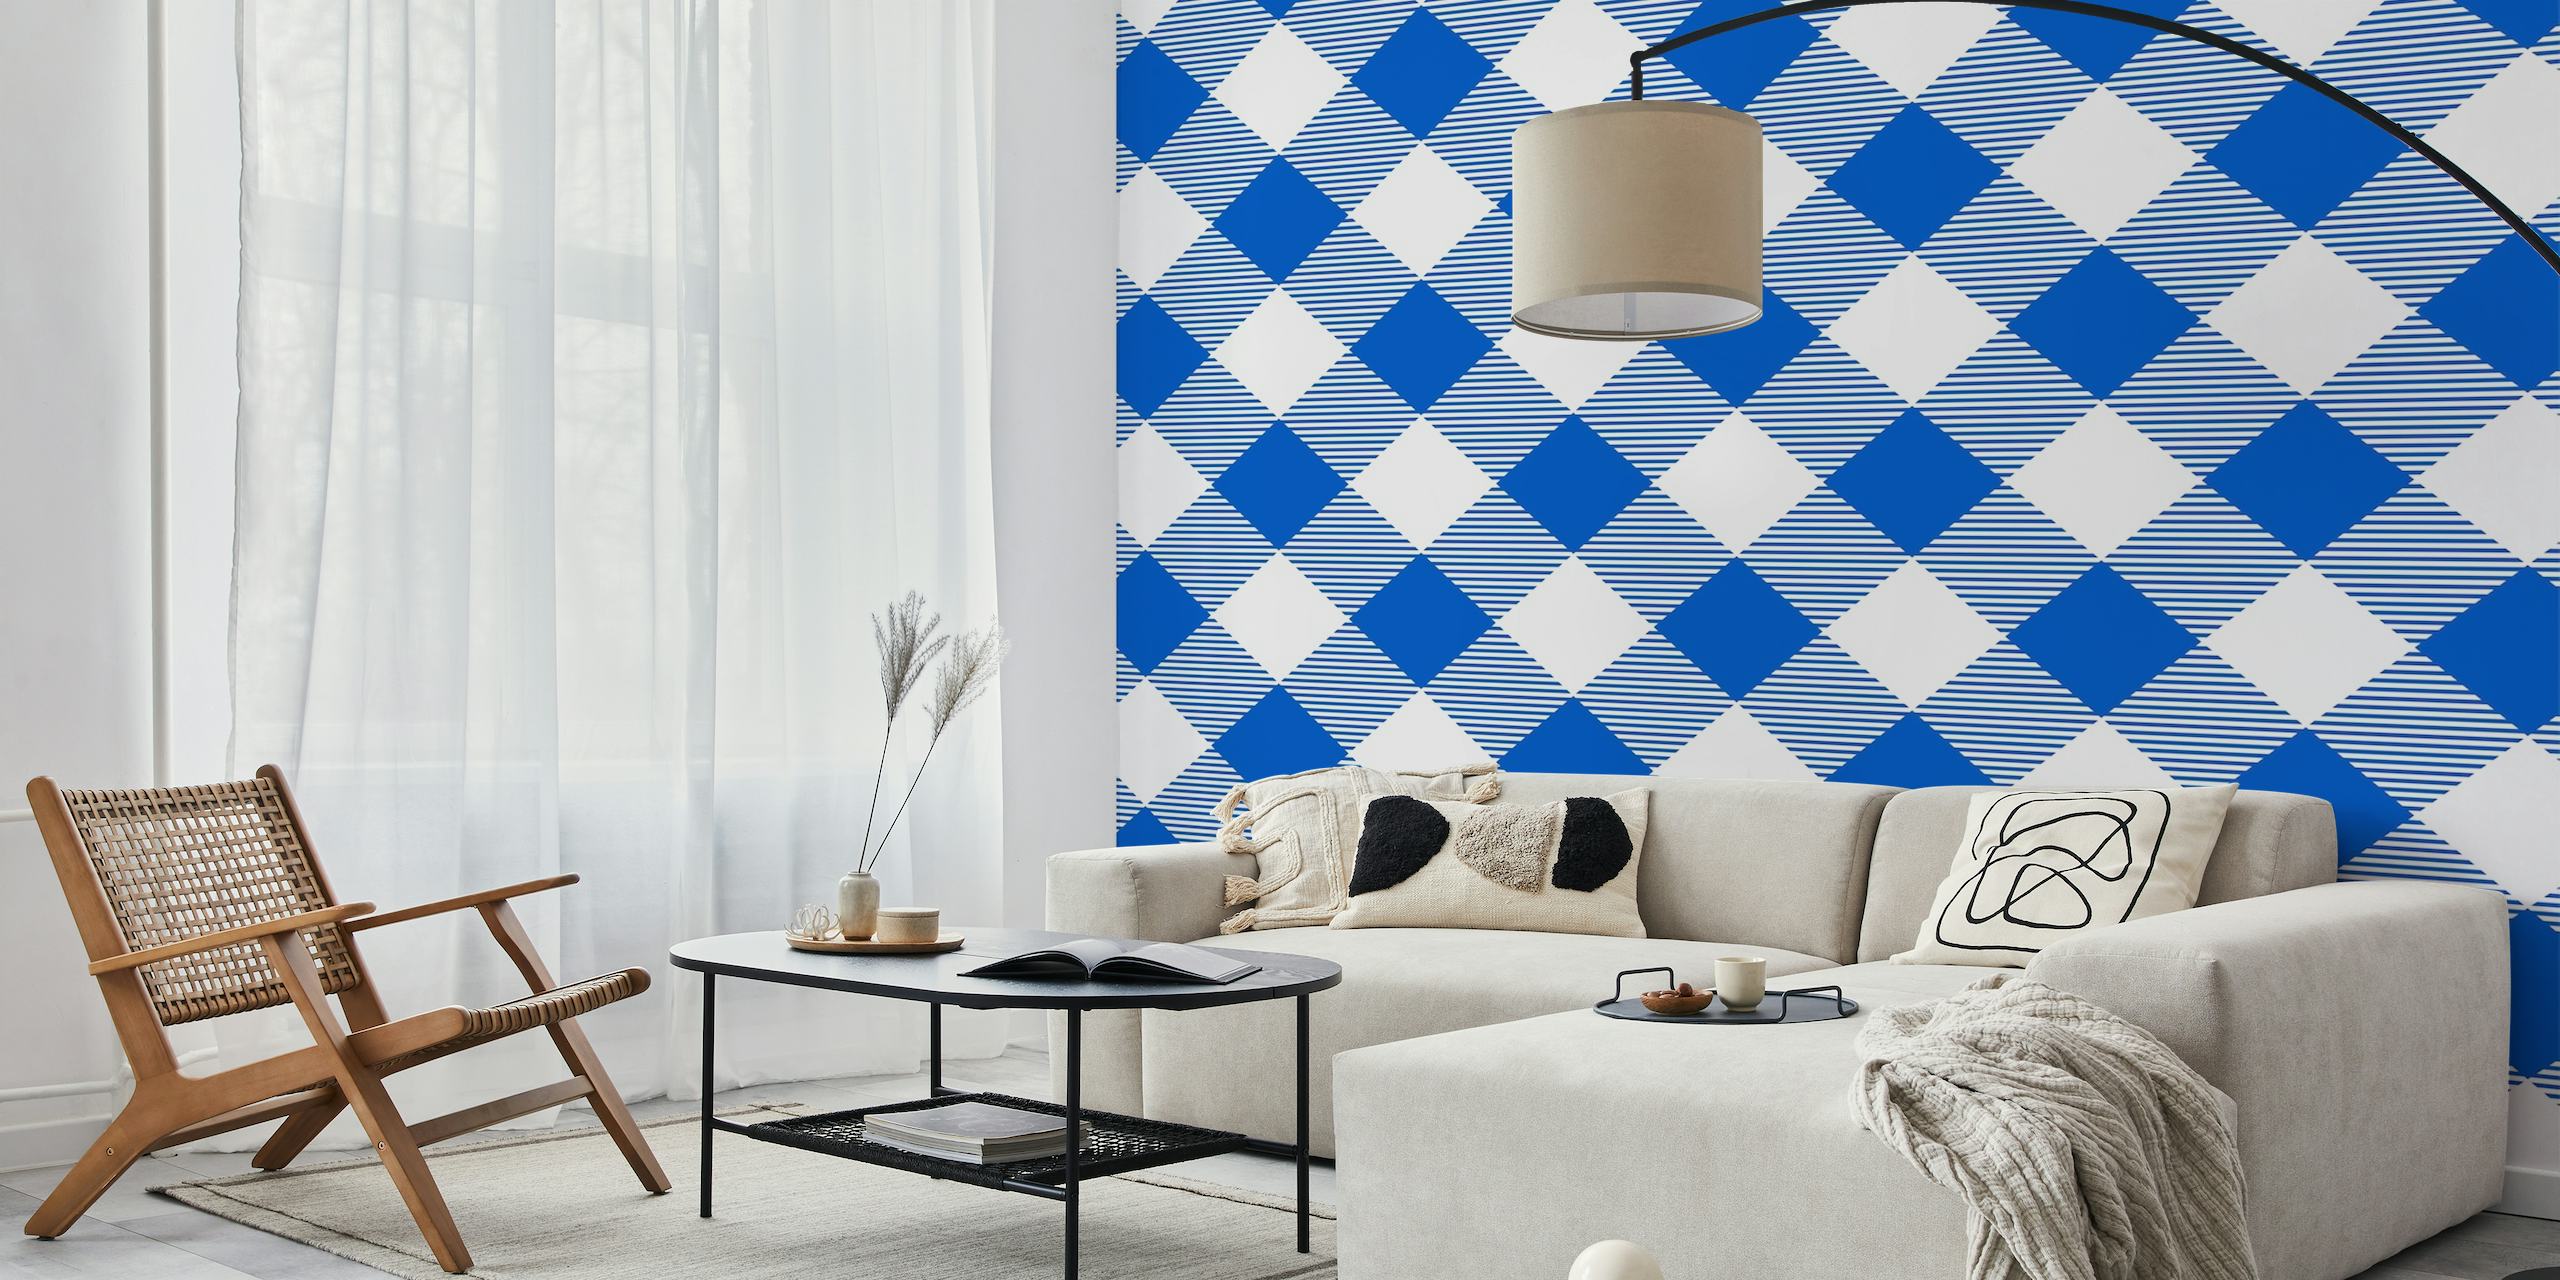 White and azure blue gingham check pattern wall mural